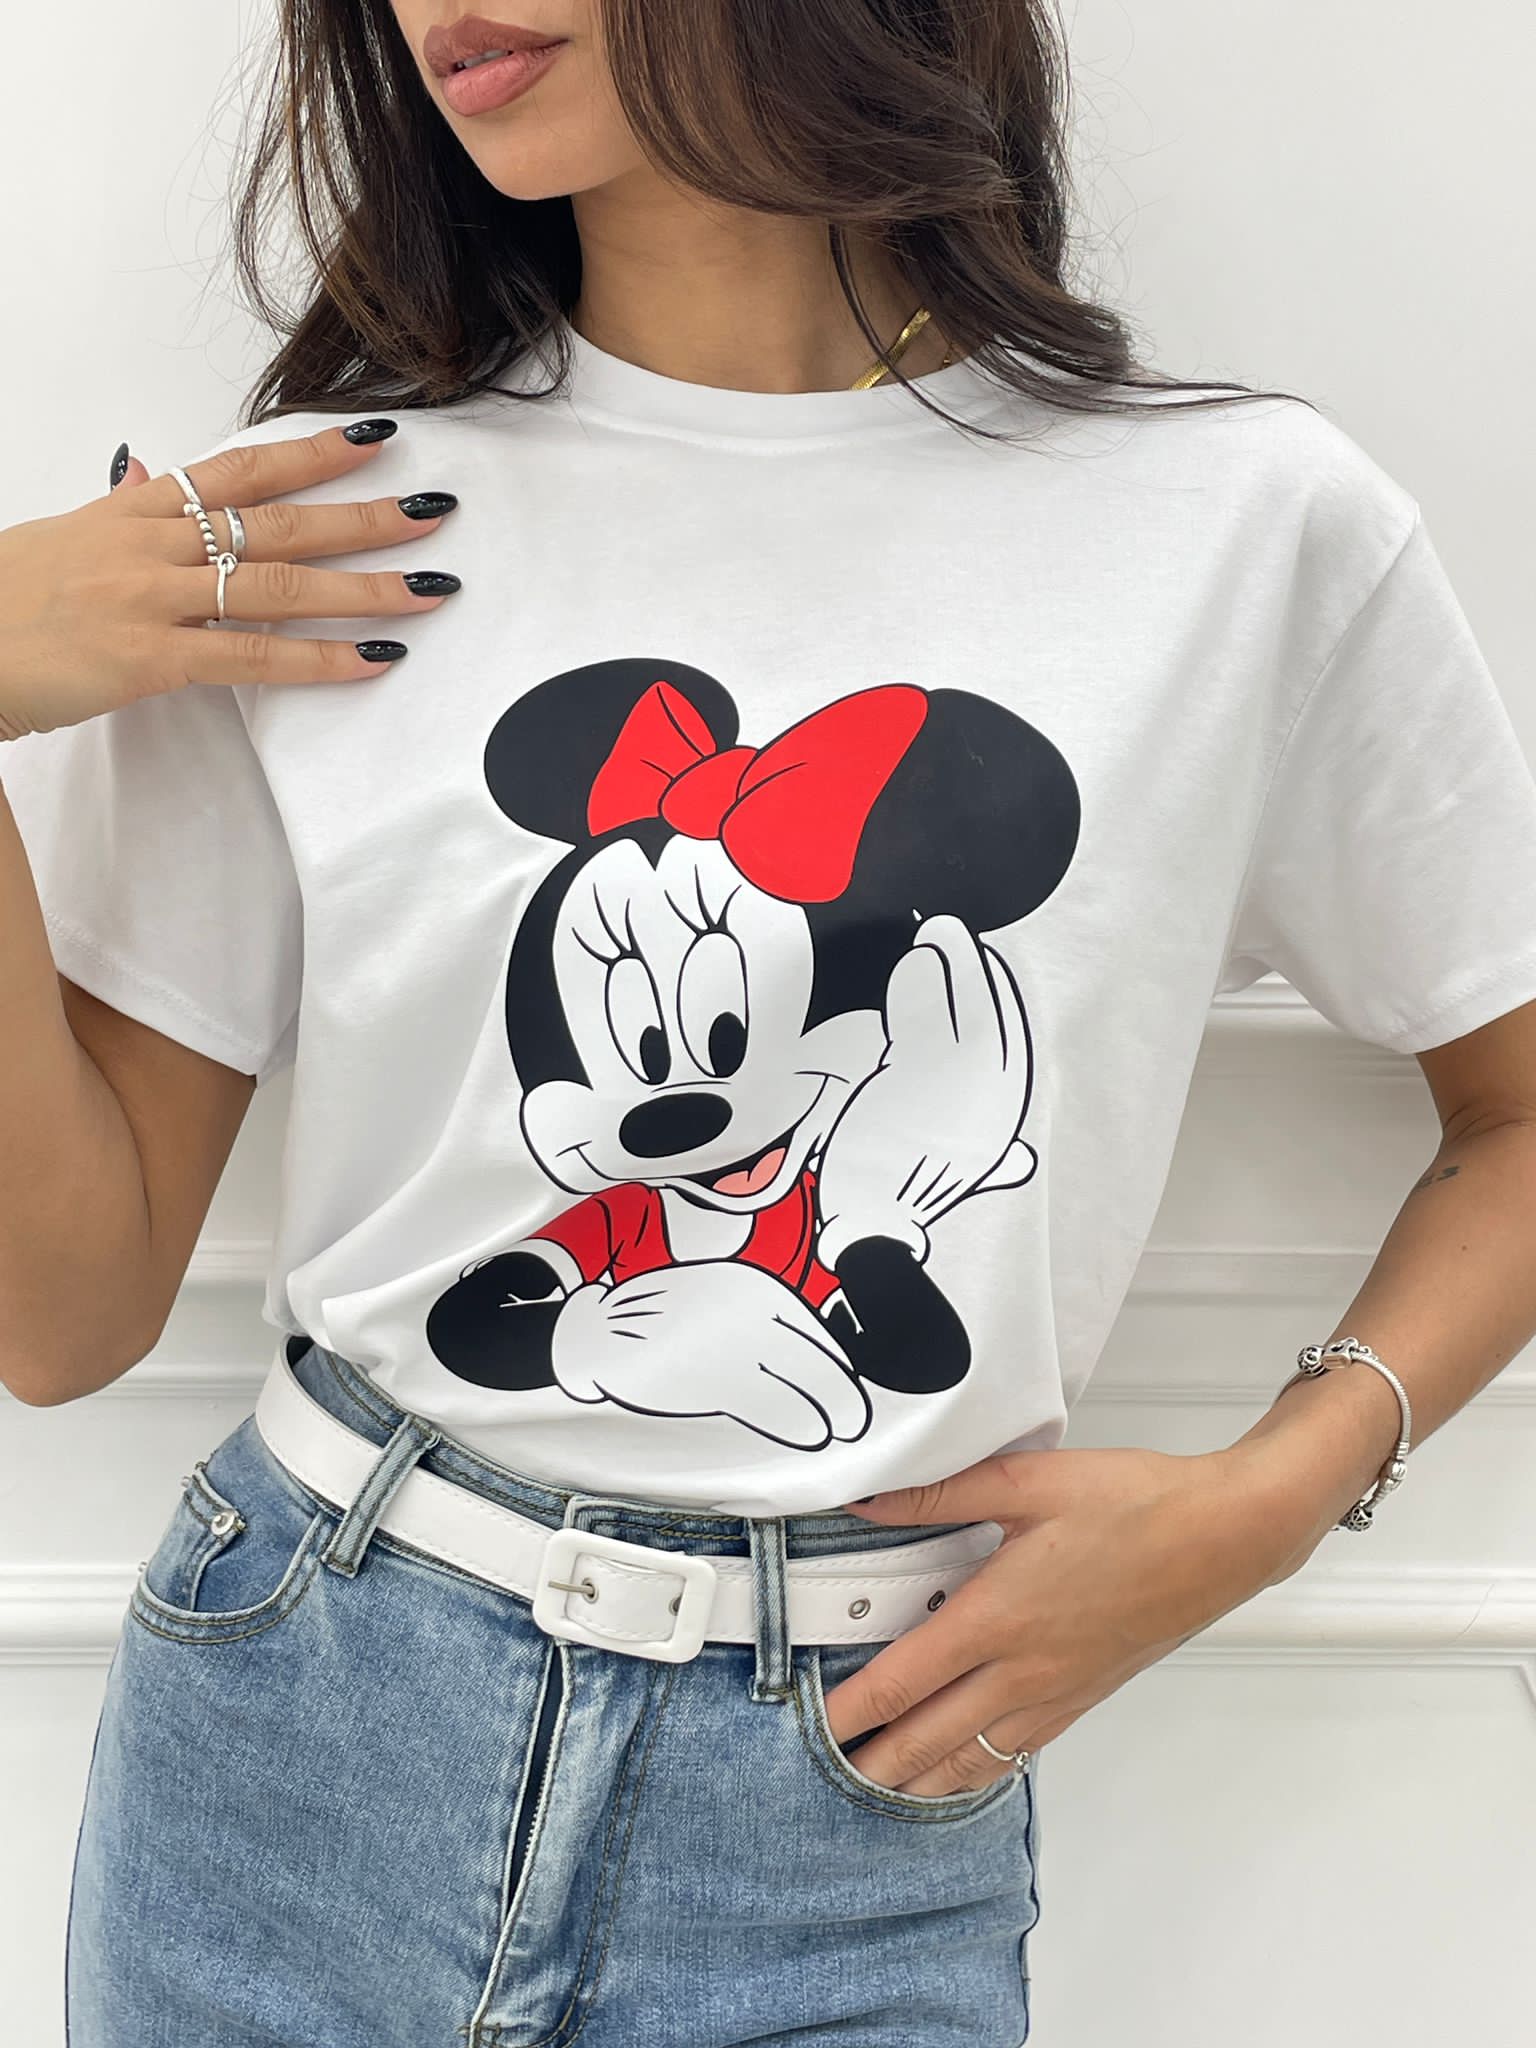 66107-T-SHIRT-STAMPA-MINNIE-NEW-COLLECTION-T-SHIRT-STAMPA-MINNIE-NEW-COLLECTION.jpg